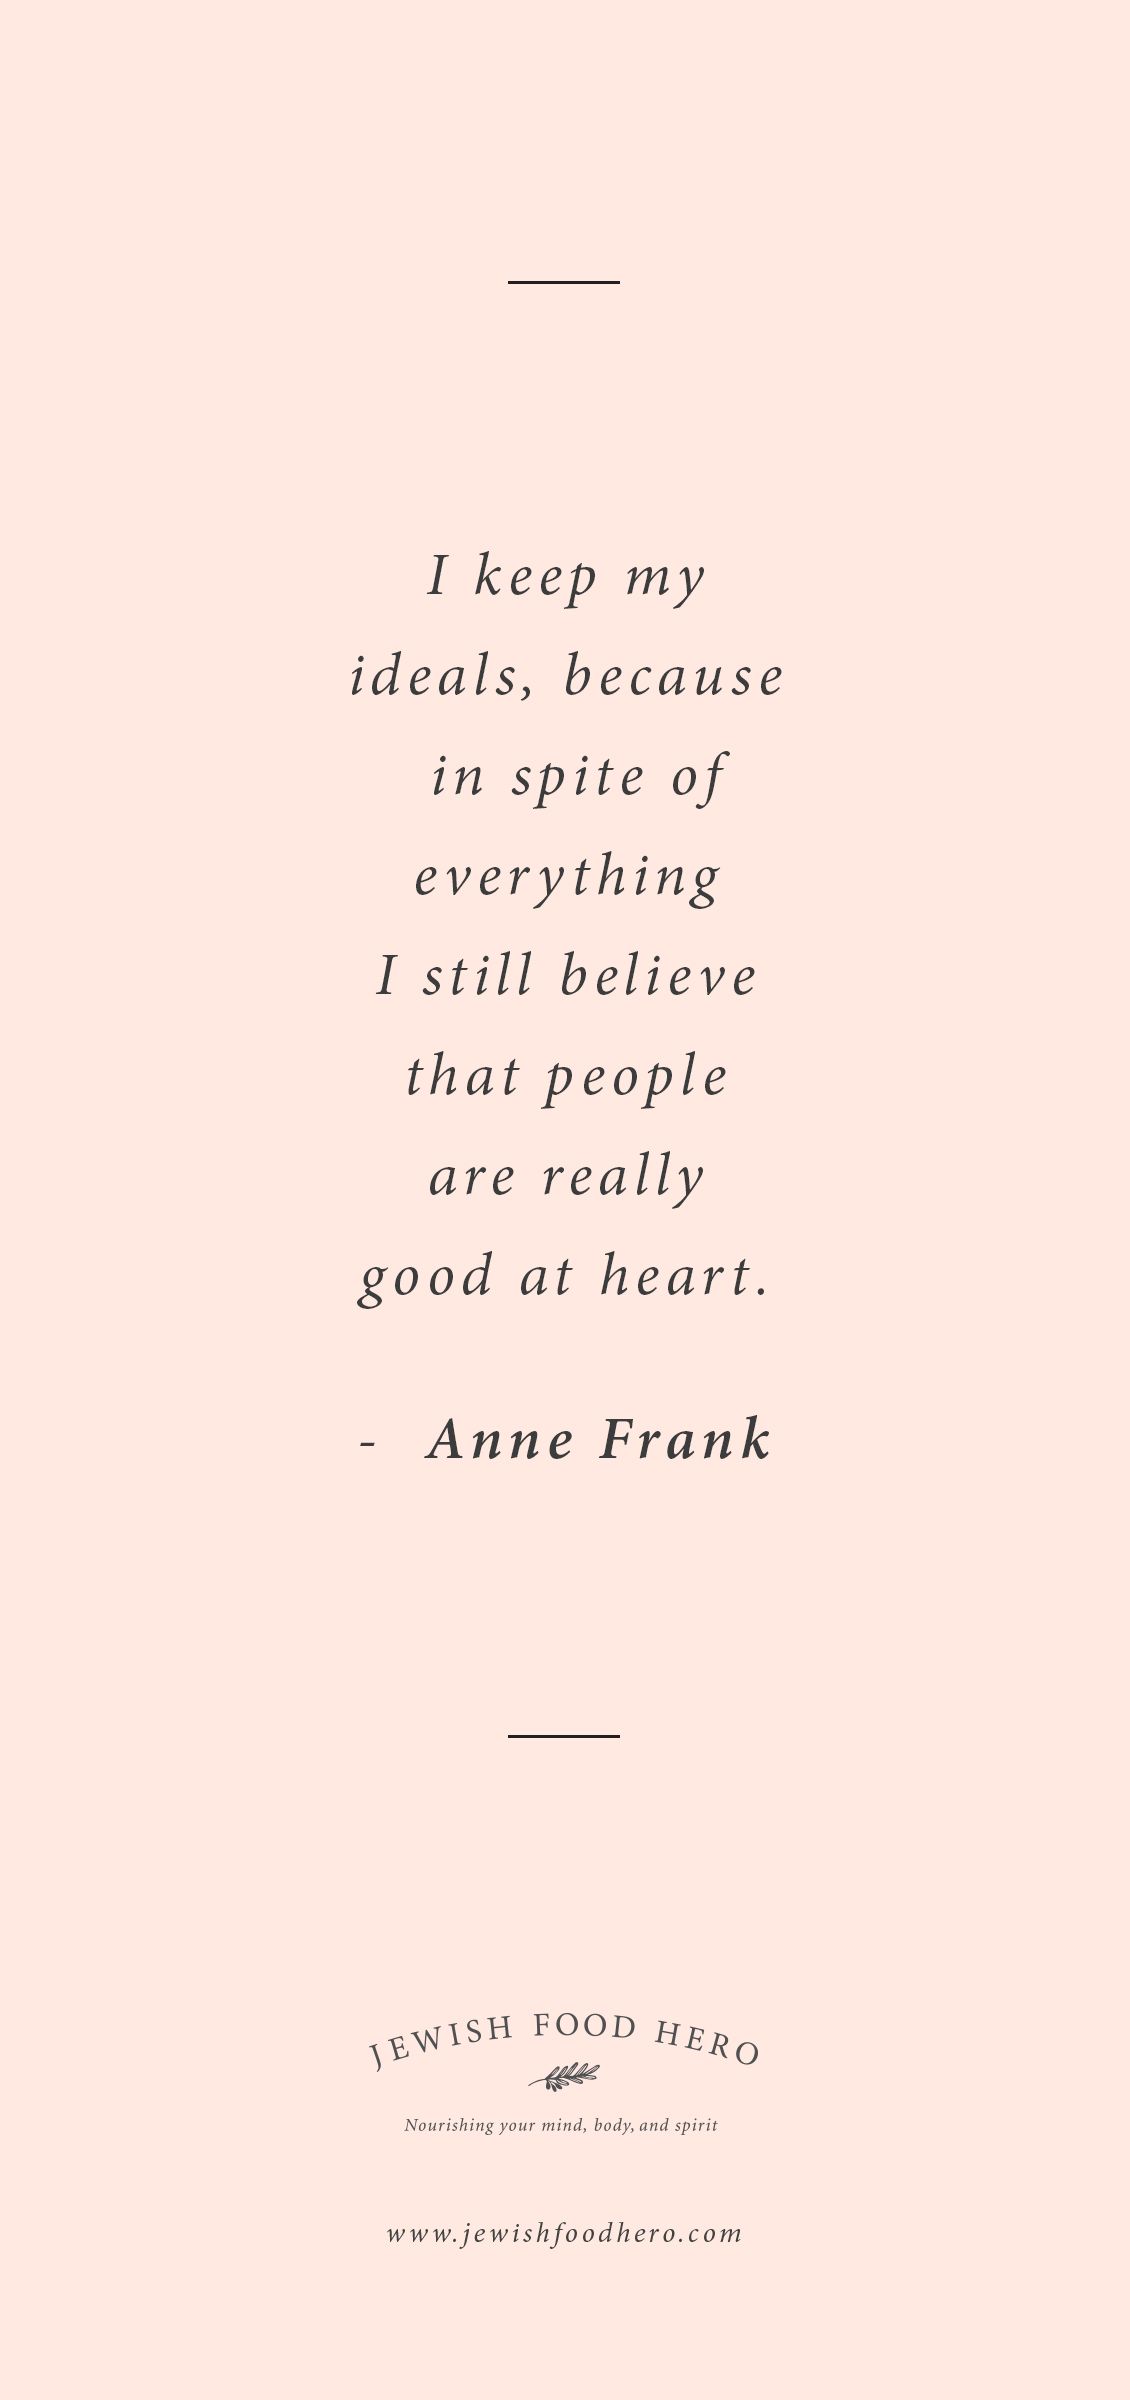  Anne Frank Hintergrundbild 1130x2400. Home Food Hero. Quotations, Inspirational quotes, Great words